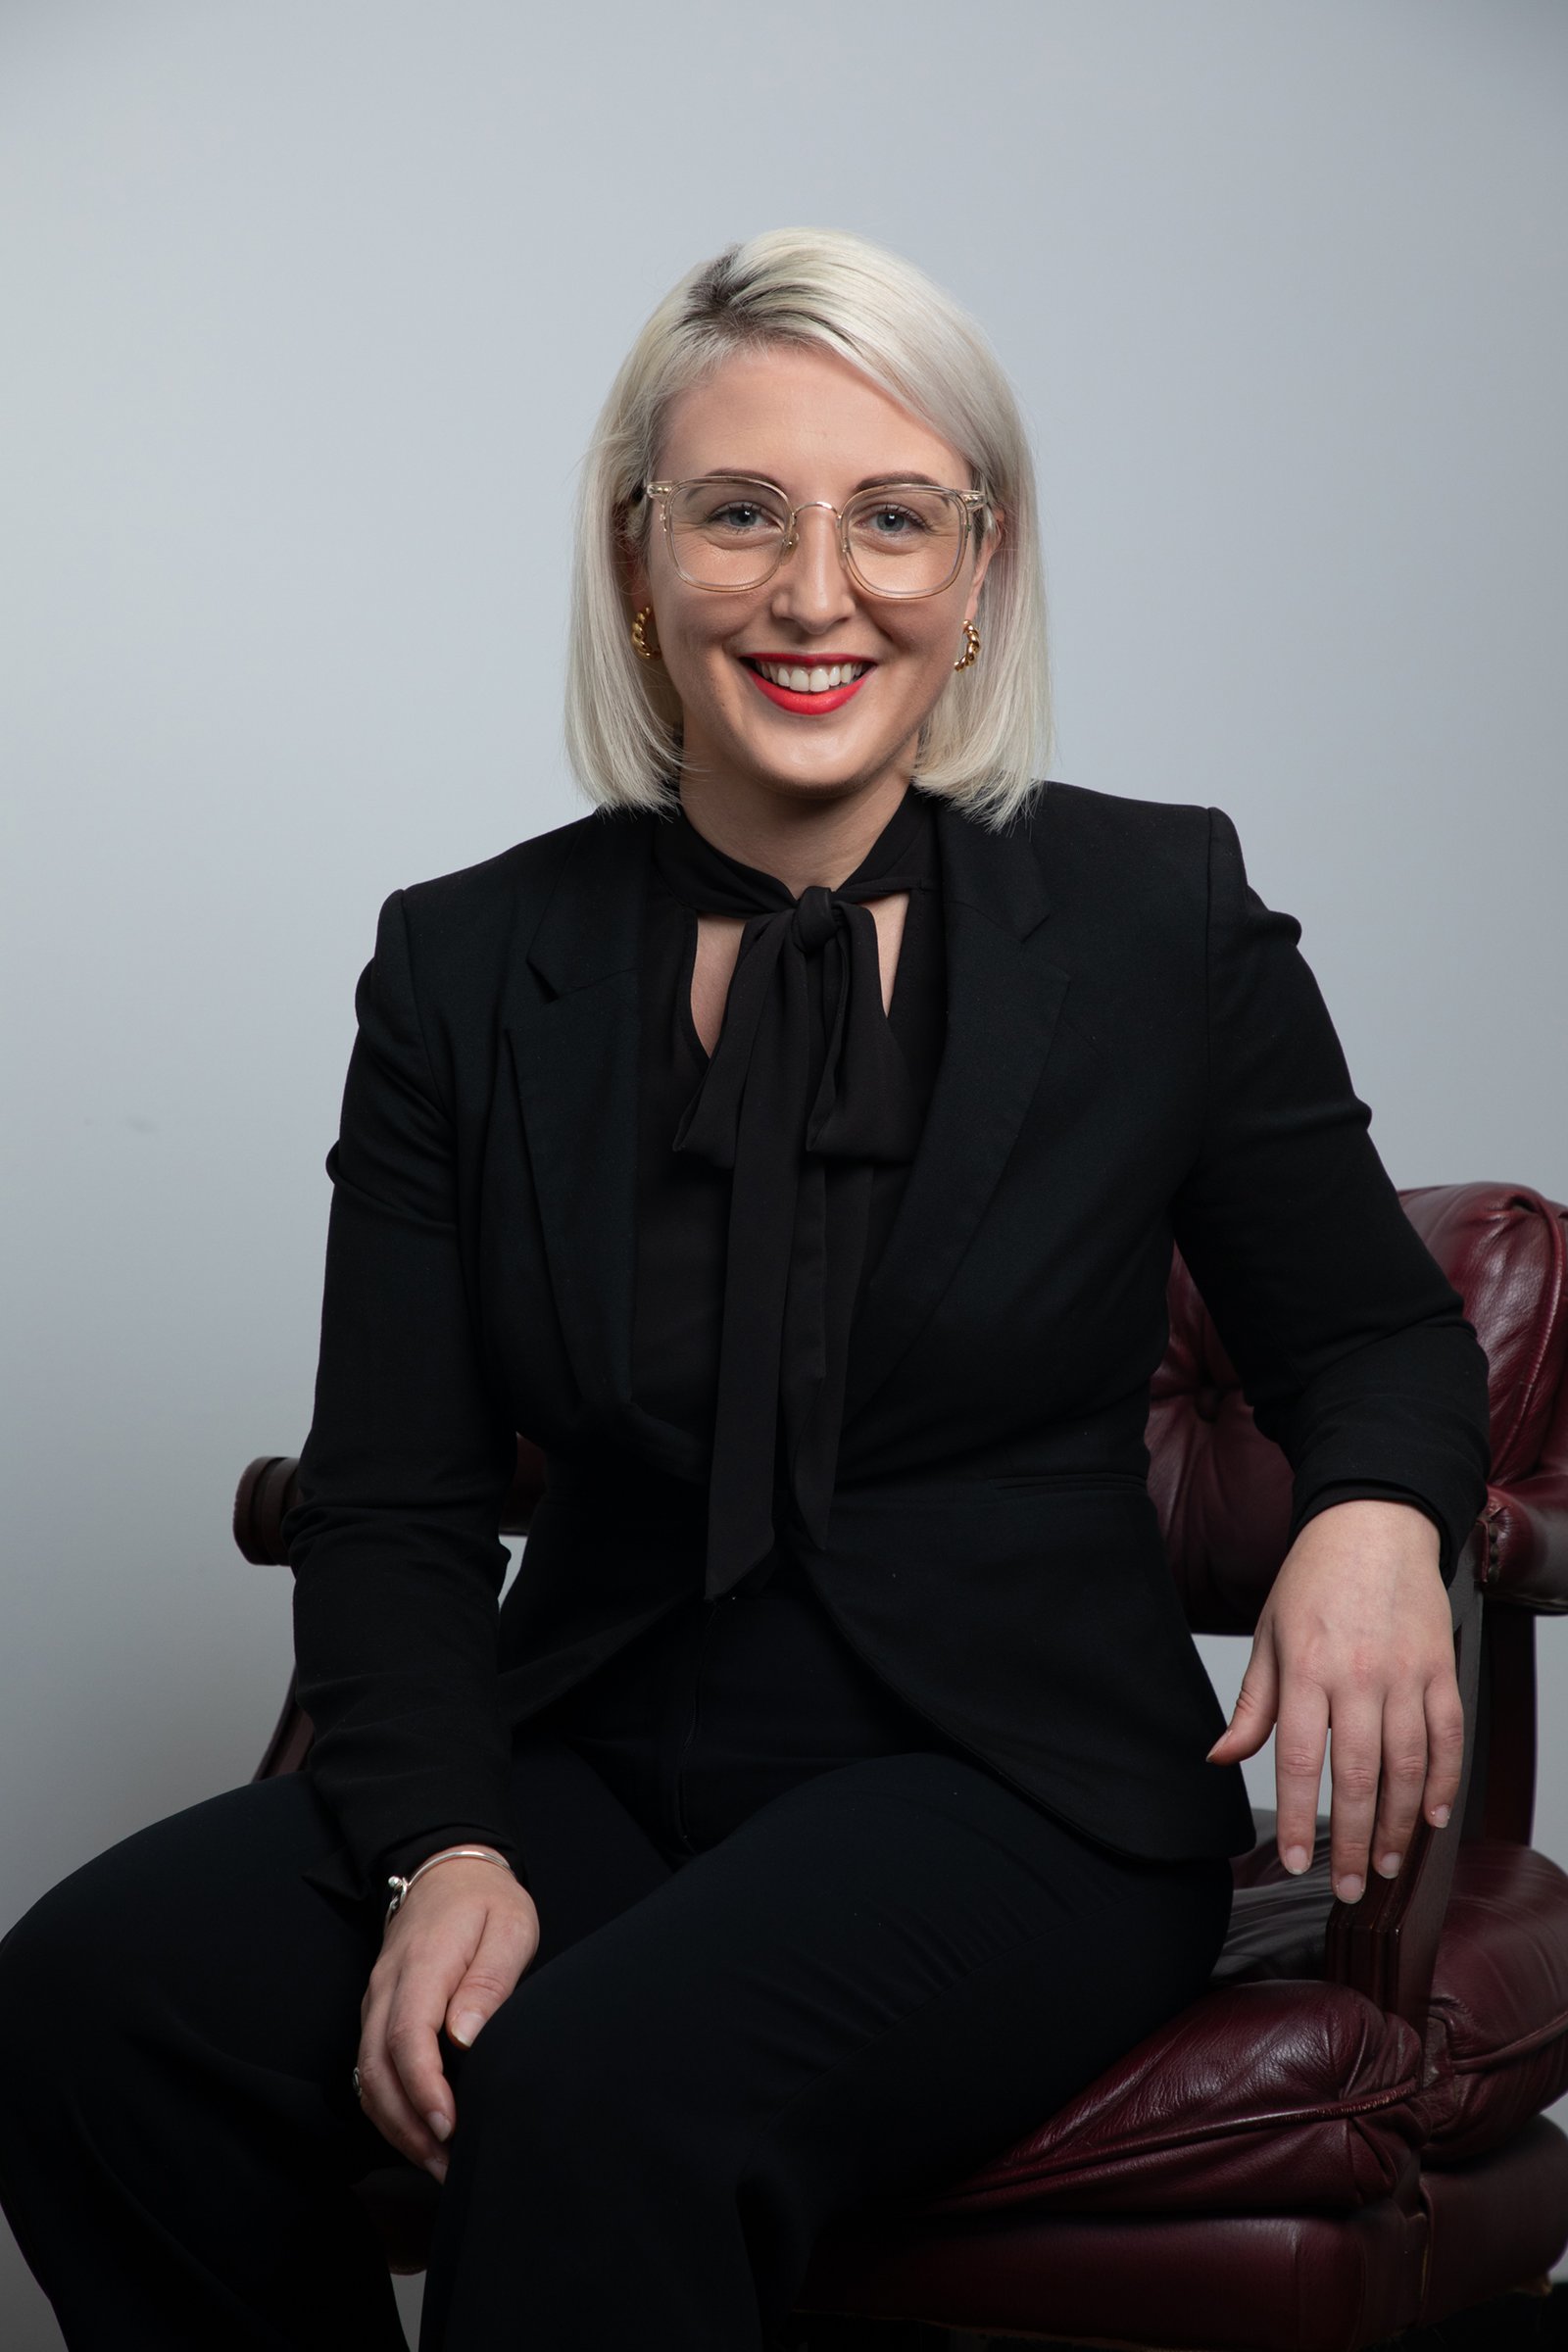 Formal corporate branding headshot of female solicitor in front of white wall